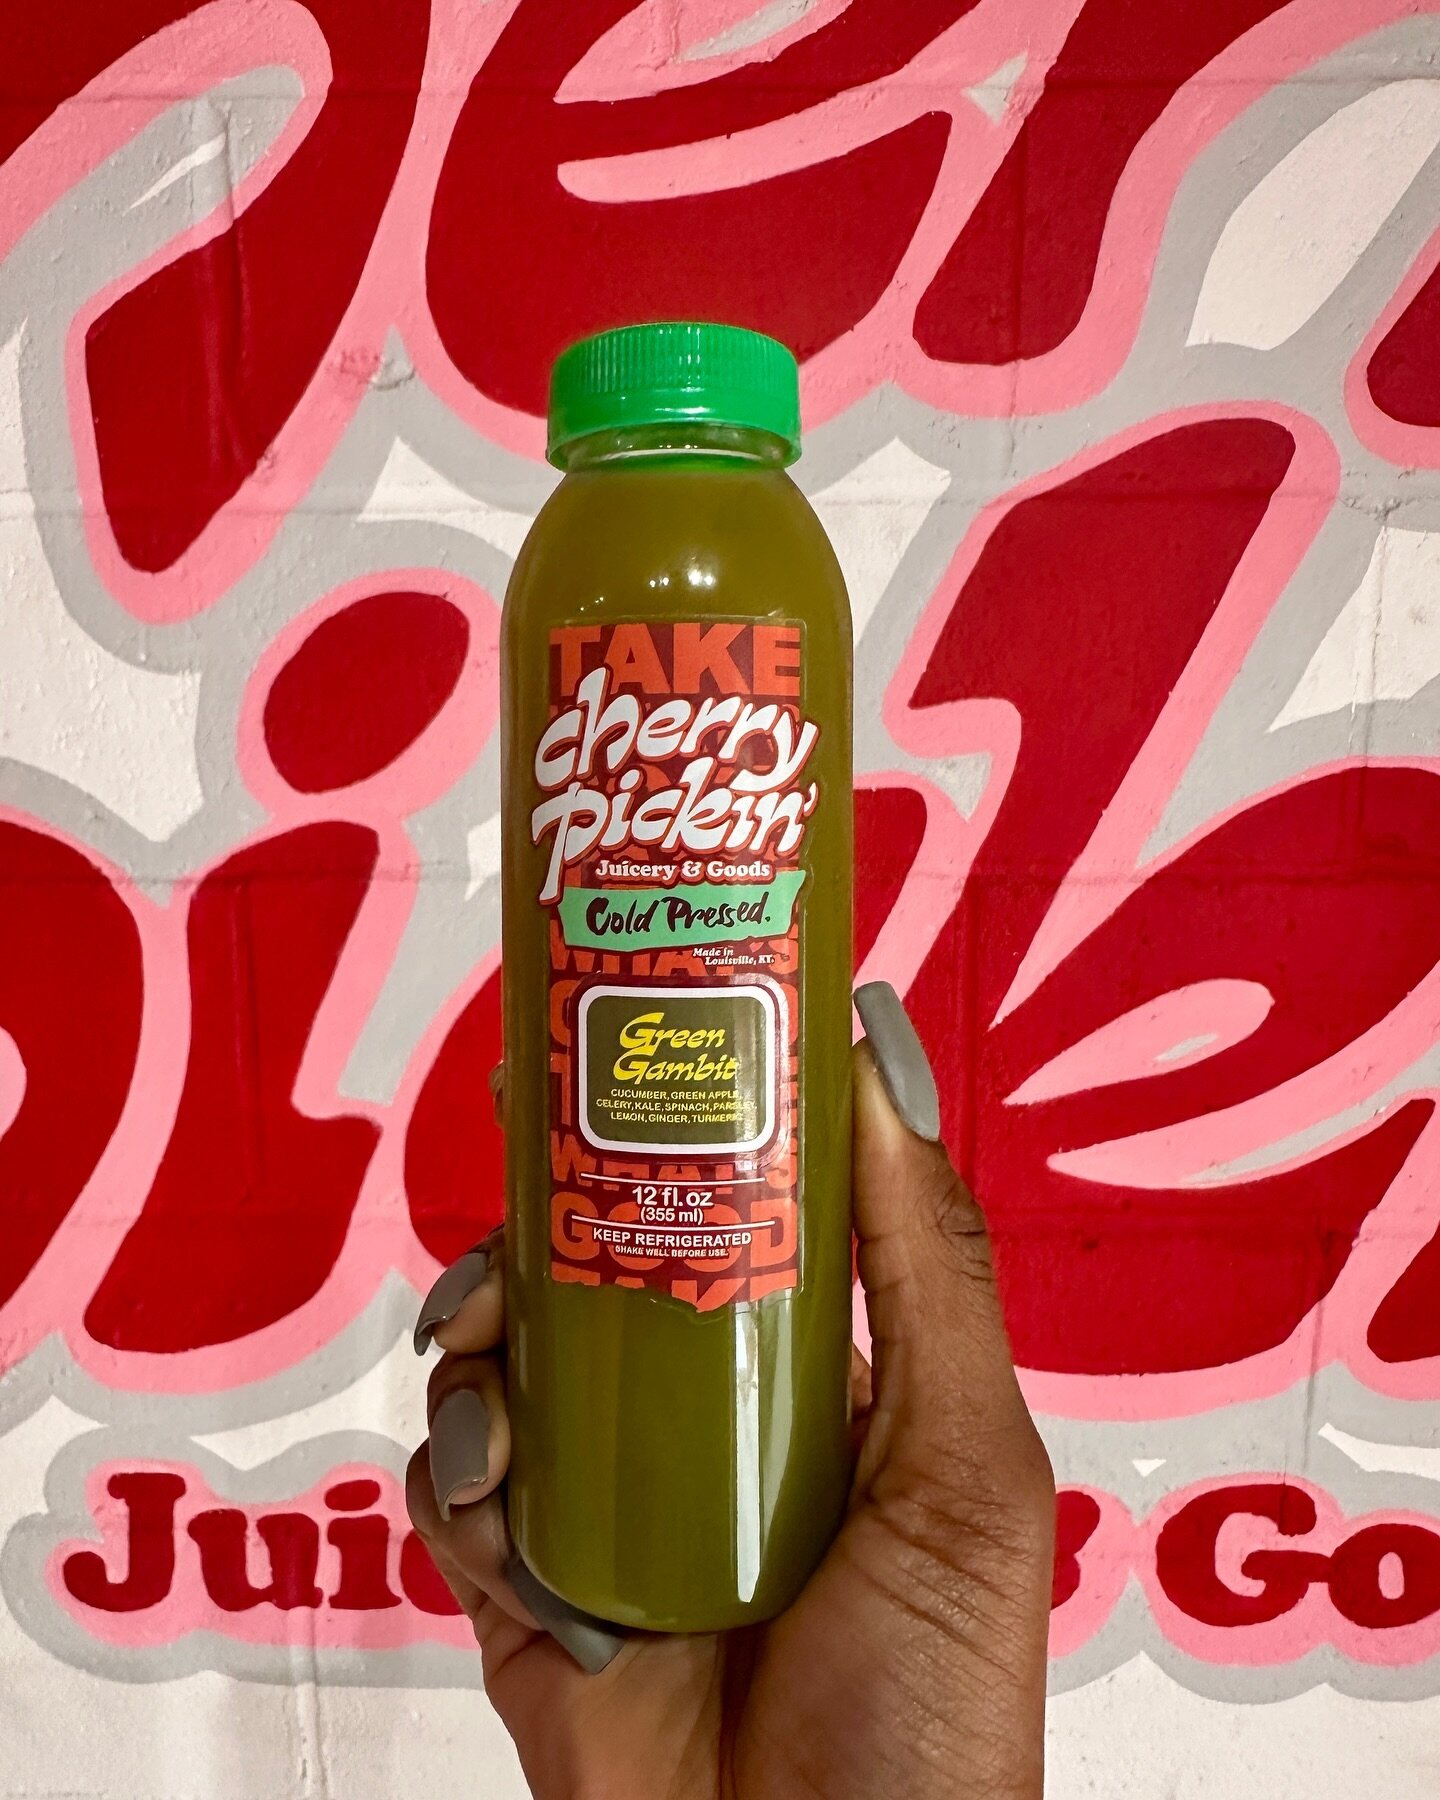 The Green Gambit is a staple in our cleanses. It is a green juice that is packed with nutrient dense vegetables. 🤓
&zwnj;
Cucumber 🥒
Celery
Kale 🥬
Spinach
Parsley
Green Apple
Lemon 🍋
Ginger 🫚
&zwnj;
📍828 E Main St. (Rear) Behind the local seltz